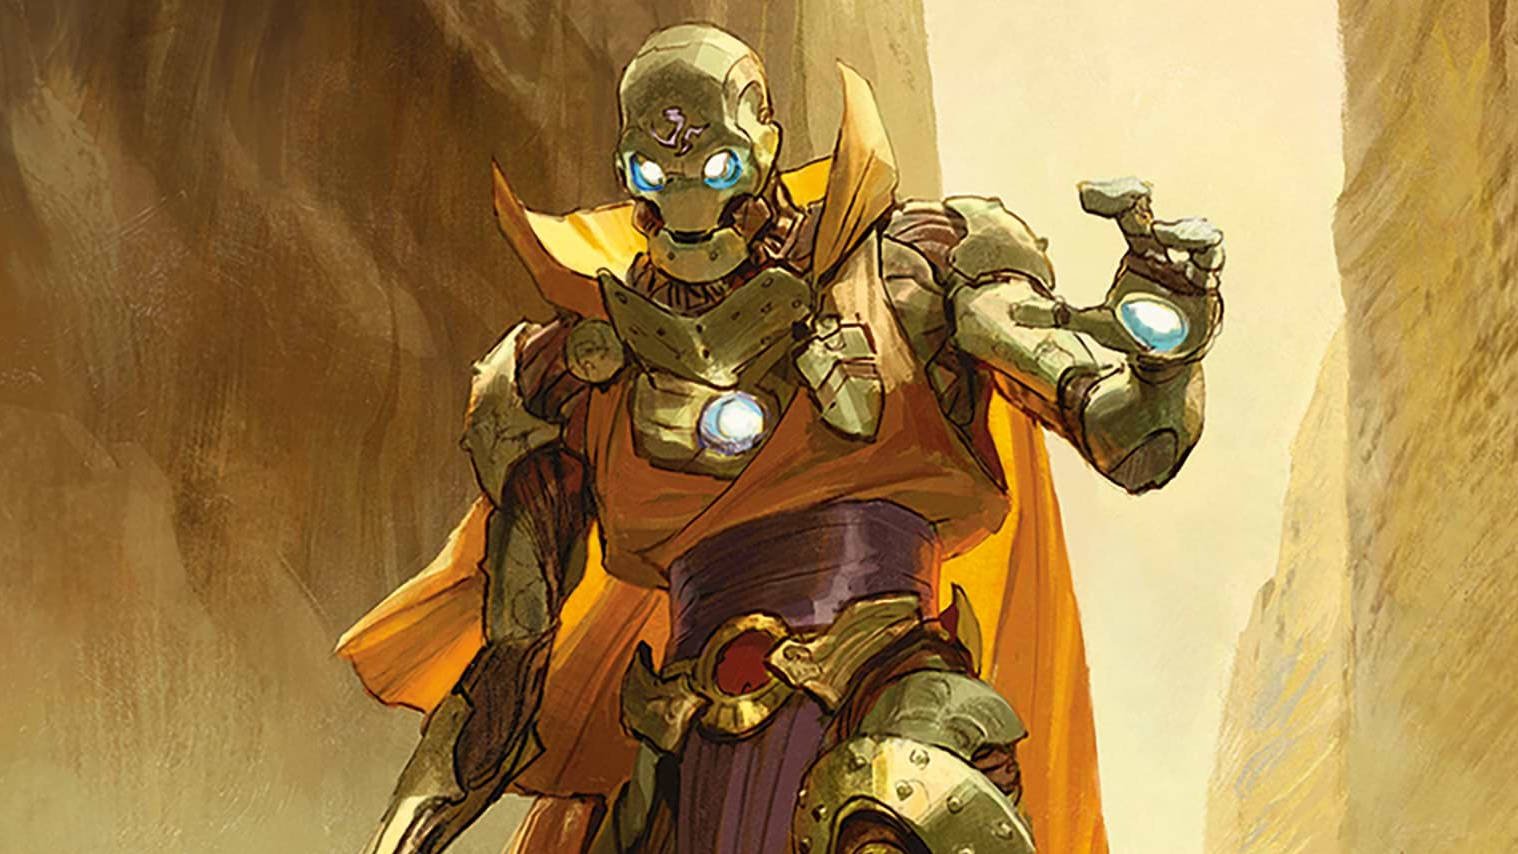 DnD character builds 5e - Wizards of the Coast artwork showing a D&D Warforged robot wearing a cape